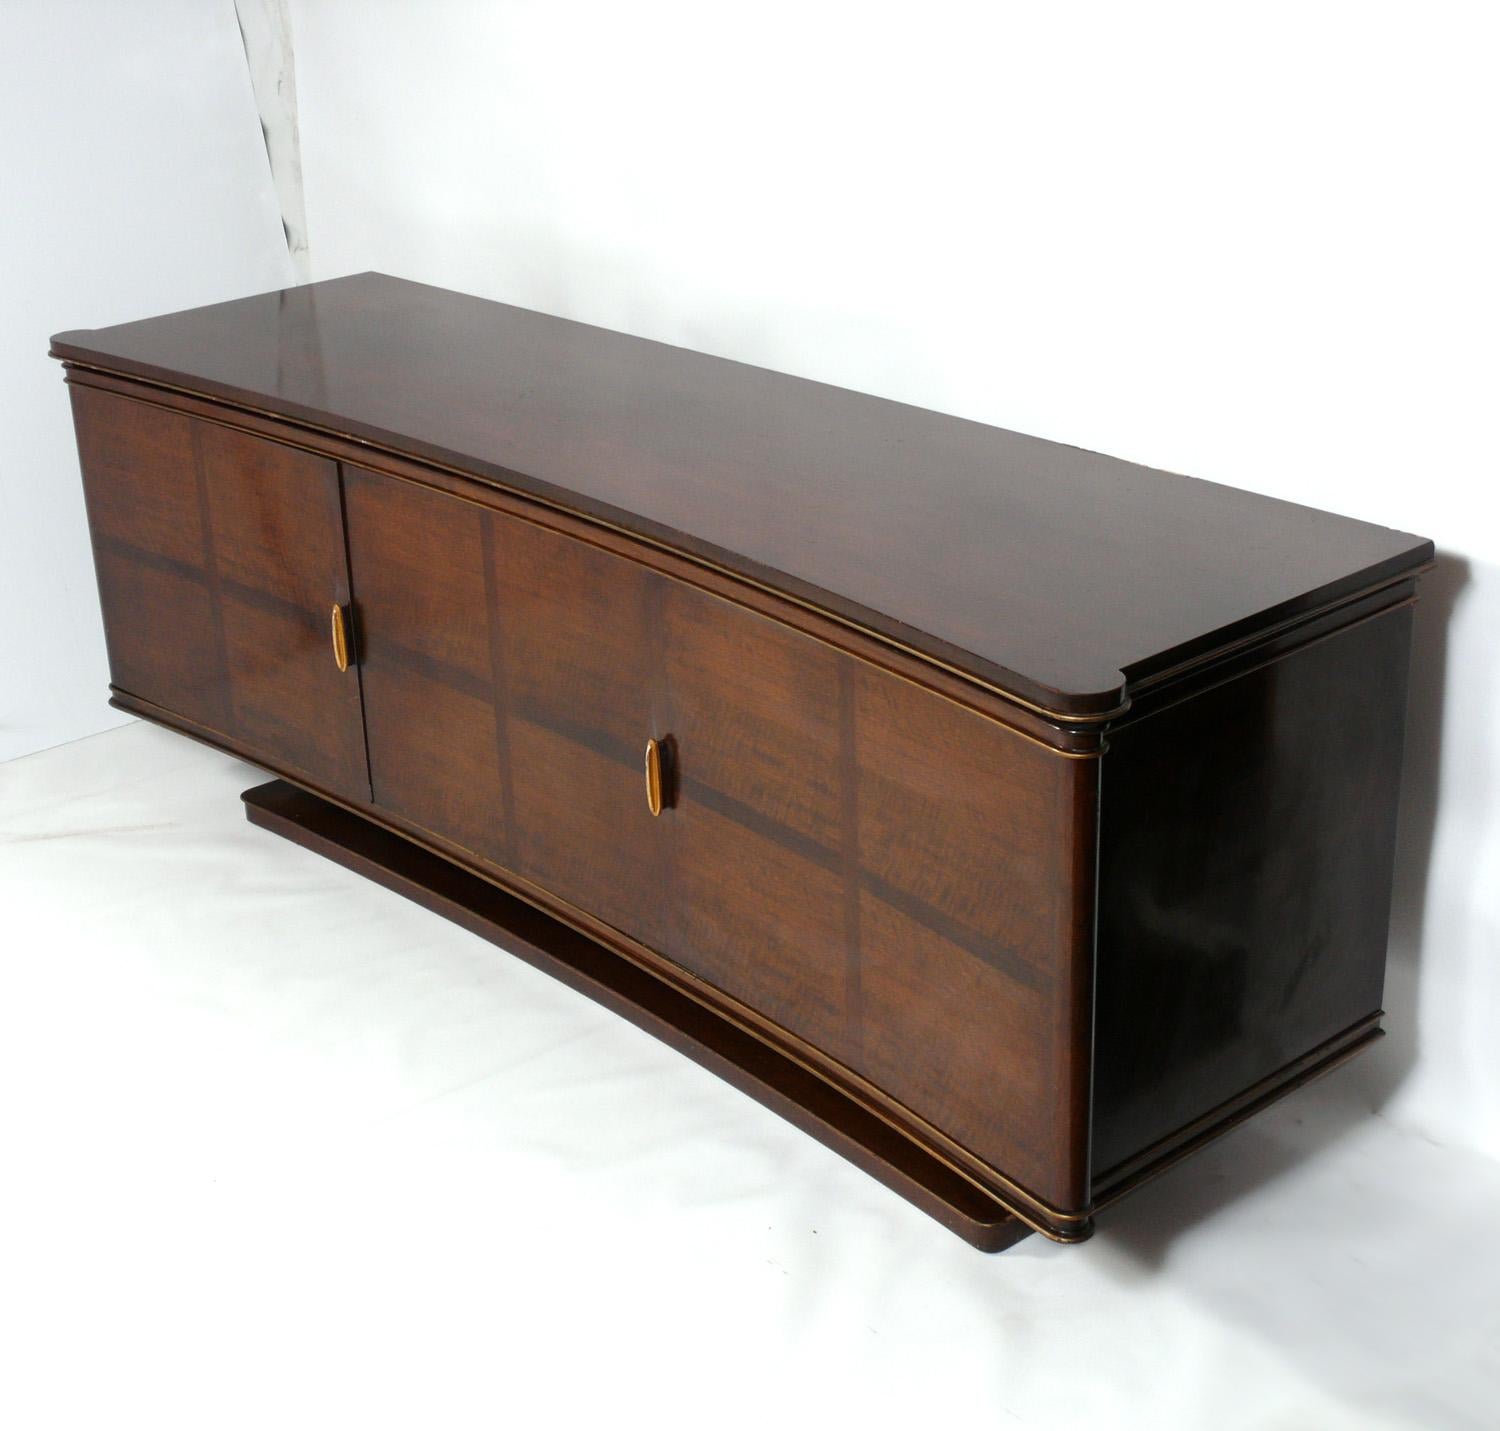 French Art Deco Credenza or Server, France, circa 1940s. This piece is currently being refinished and can be completed in your choice of finish color. It is a versatile size and can be used as a credenza, server, sideboard, media cabinet, or bar in